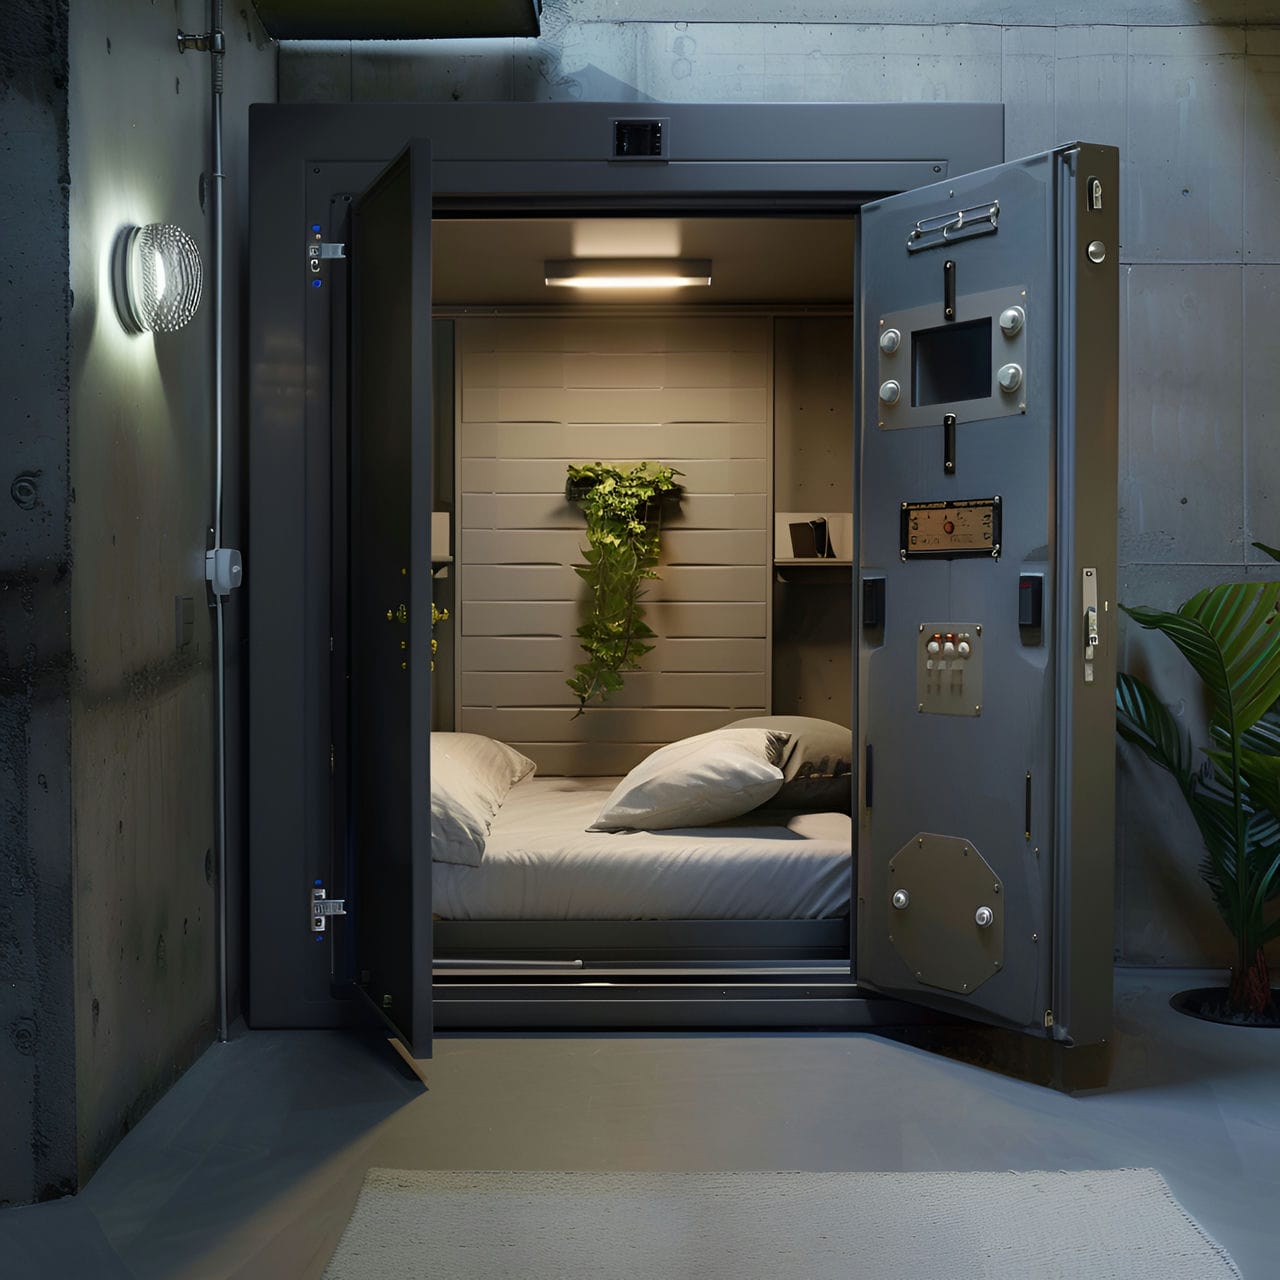 Panic room: size, functionality, uses, furniture and renovation